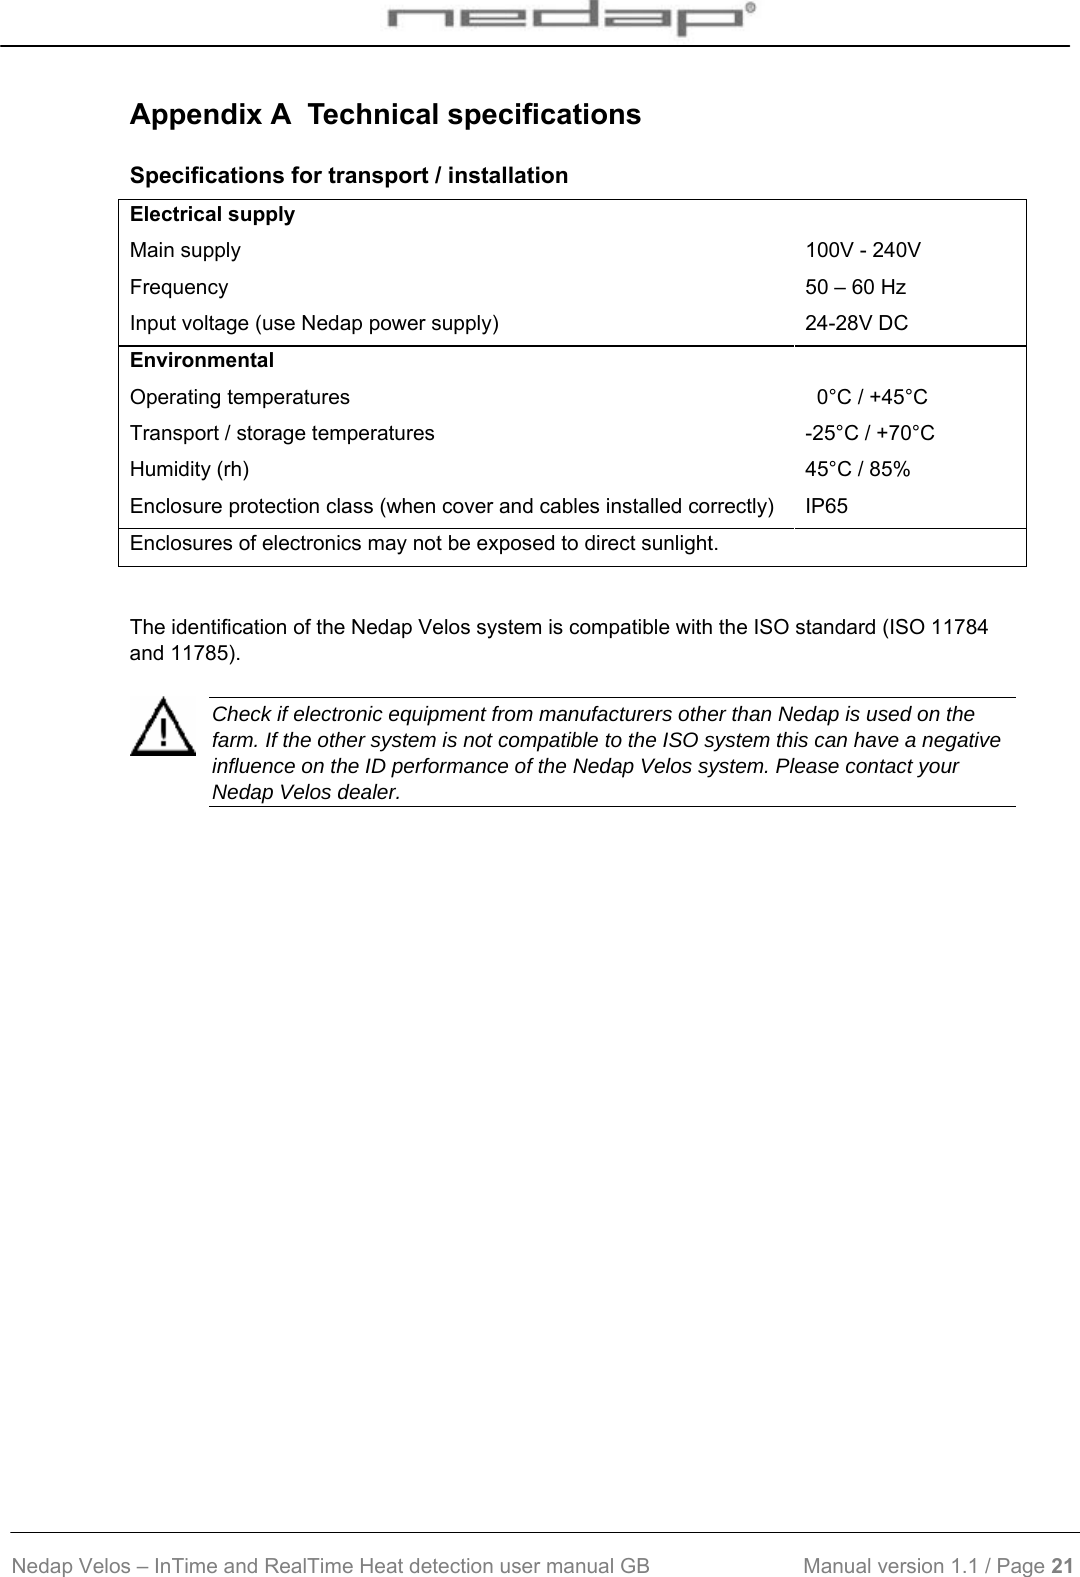  Nedap Velos – InTime and RealTime Heat detection user manual GB                           Manual version 1.1 / Page 21  Appendix A  Technical specifications Specifications for transport / installation  Electrical supply Main supply  100V - 240V Frequency  50 – 60 Hz Input voltage (use Nedap power supply)  24-28V DC Environmental Operating temperatures    0°C / +45°C Transport / storage temperatures  -25°C / +70°C Humidity (rh)  45°C / 85% Enclosure protection class (when cover and cables installed correctly)  IP65 Enclosures of electronics may not be exposed to direct sunlight.  The identification of the Nedap Velos system is compatible with the ISO standard (ISO 11784 and 11785).    Check if electronic equipment from manufacturers other than Nedap is used on the farm. If the other system is not compatible to the ISO system this can have a negative influence on the ID performance of the Nedap Velos system. Please contact your Nedap Velos dealer.     